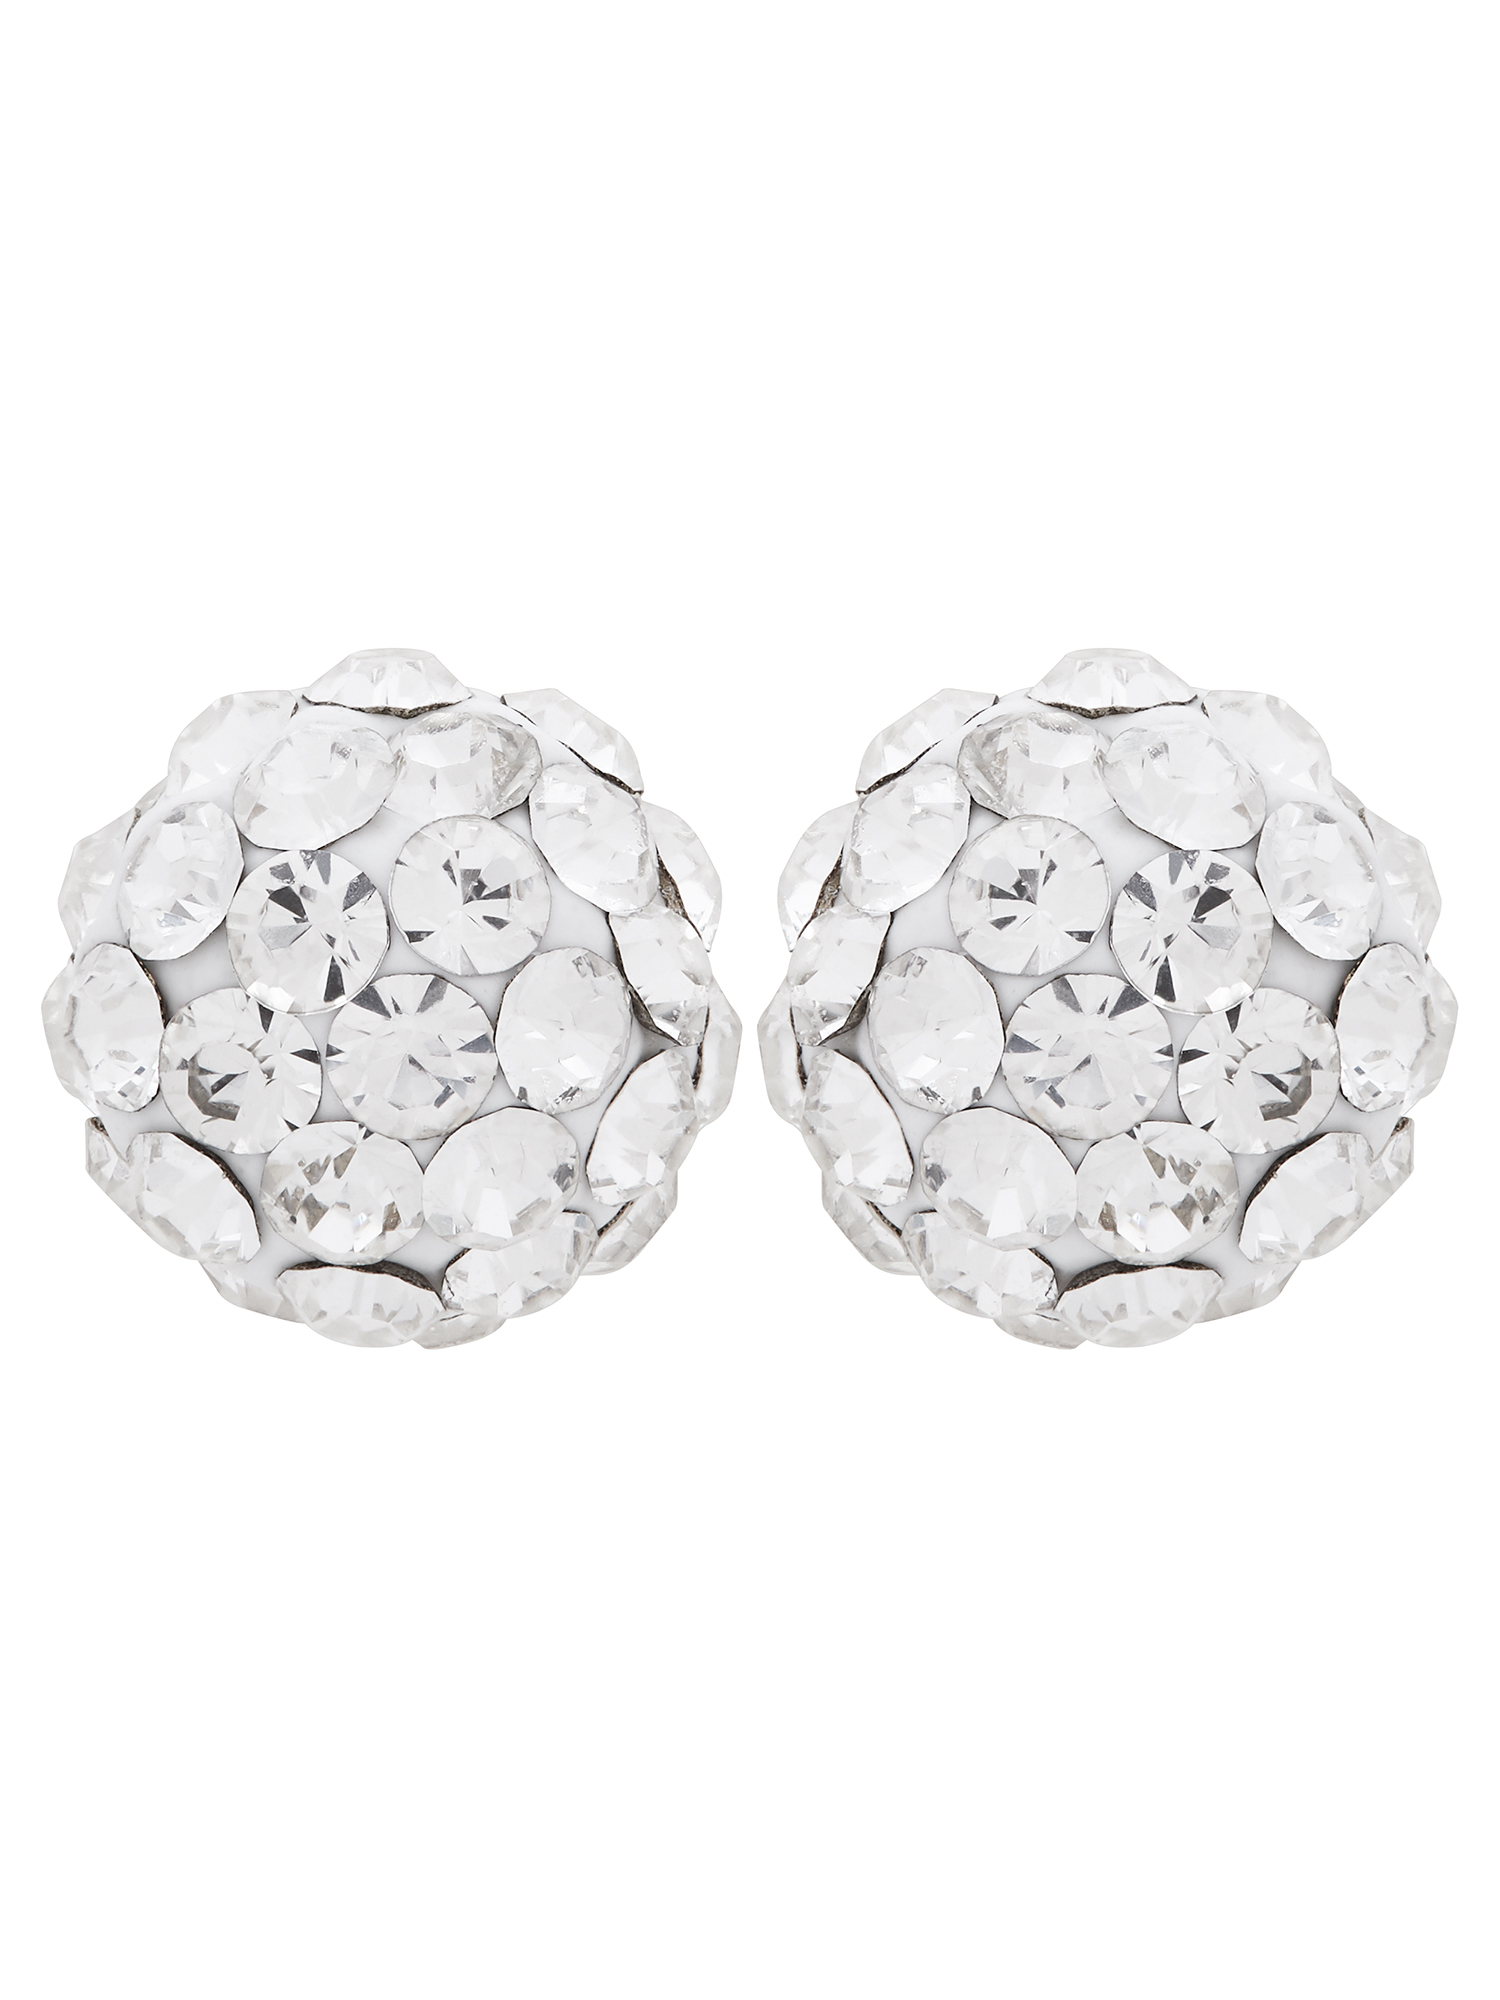 Brilliance Fine Jewelry White Crystals 4.8MM Studs in 10K Yellow Gold Earrings - image 2 of 4